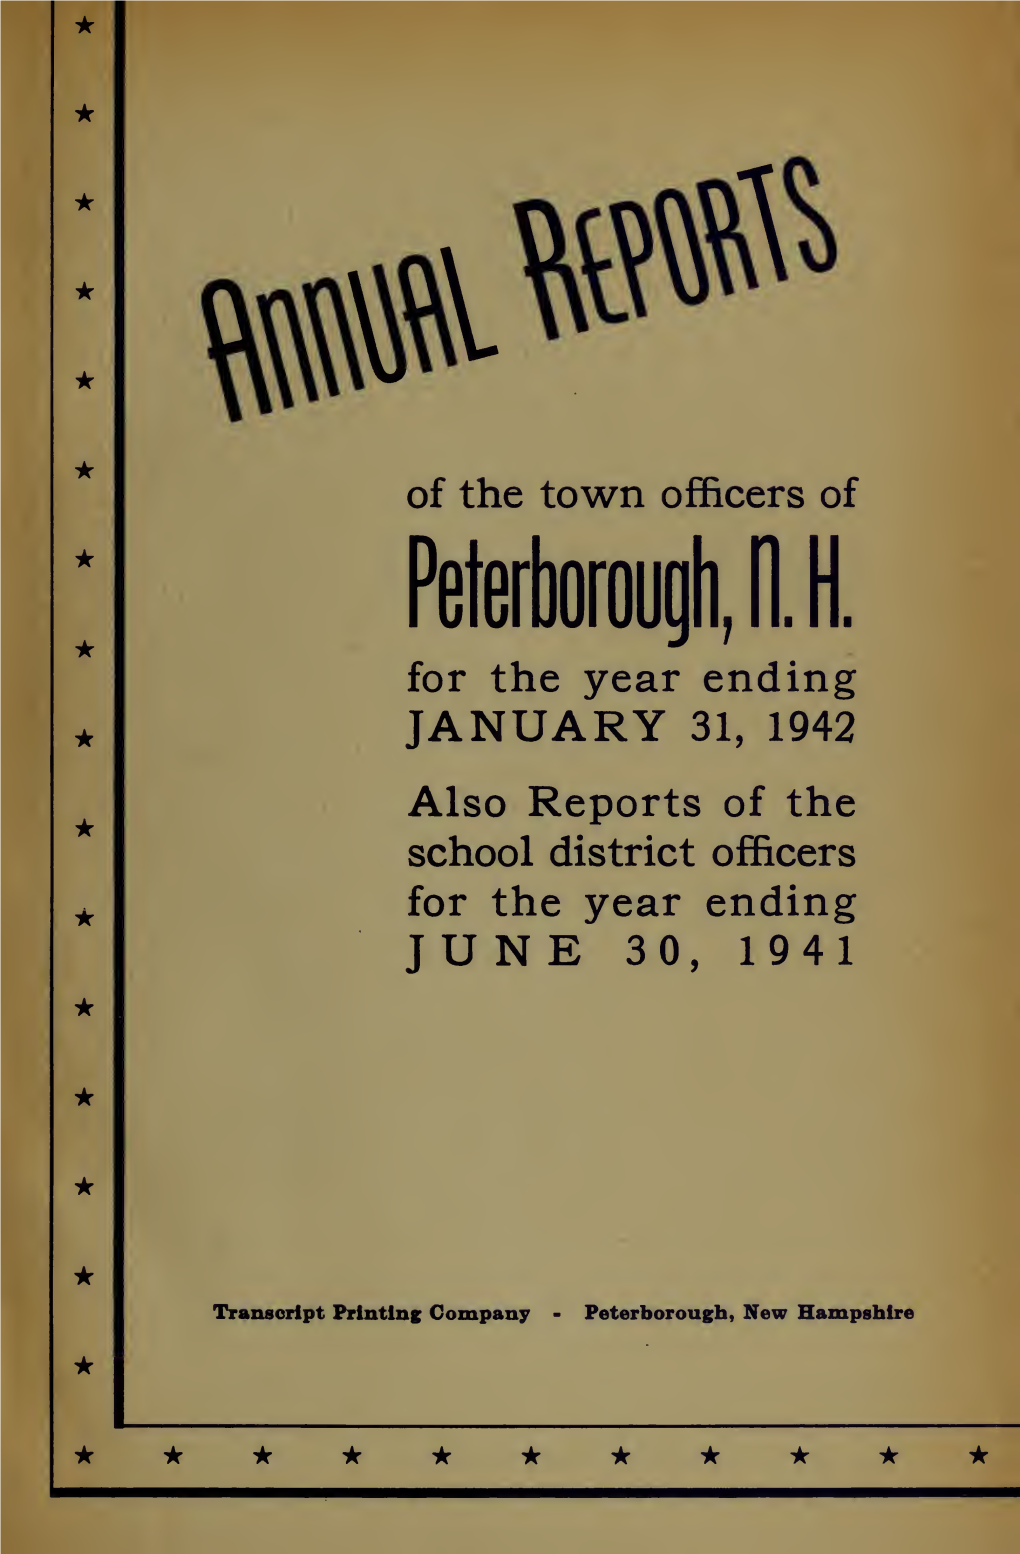 Annual Report of the Town of Peterborough, New Hampshire